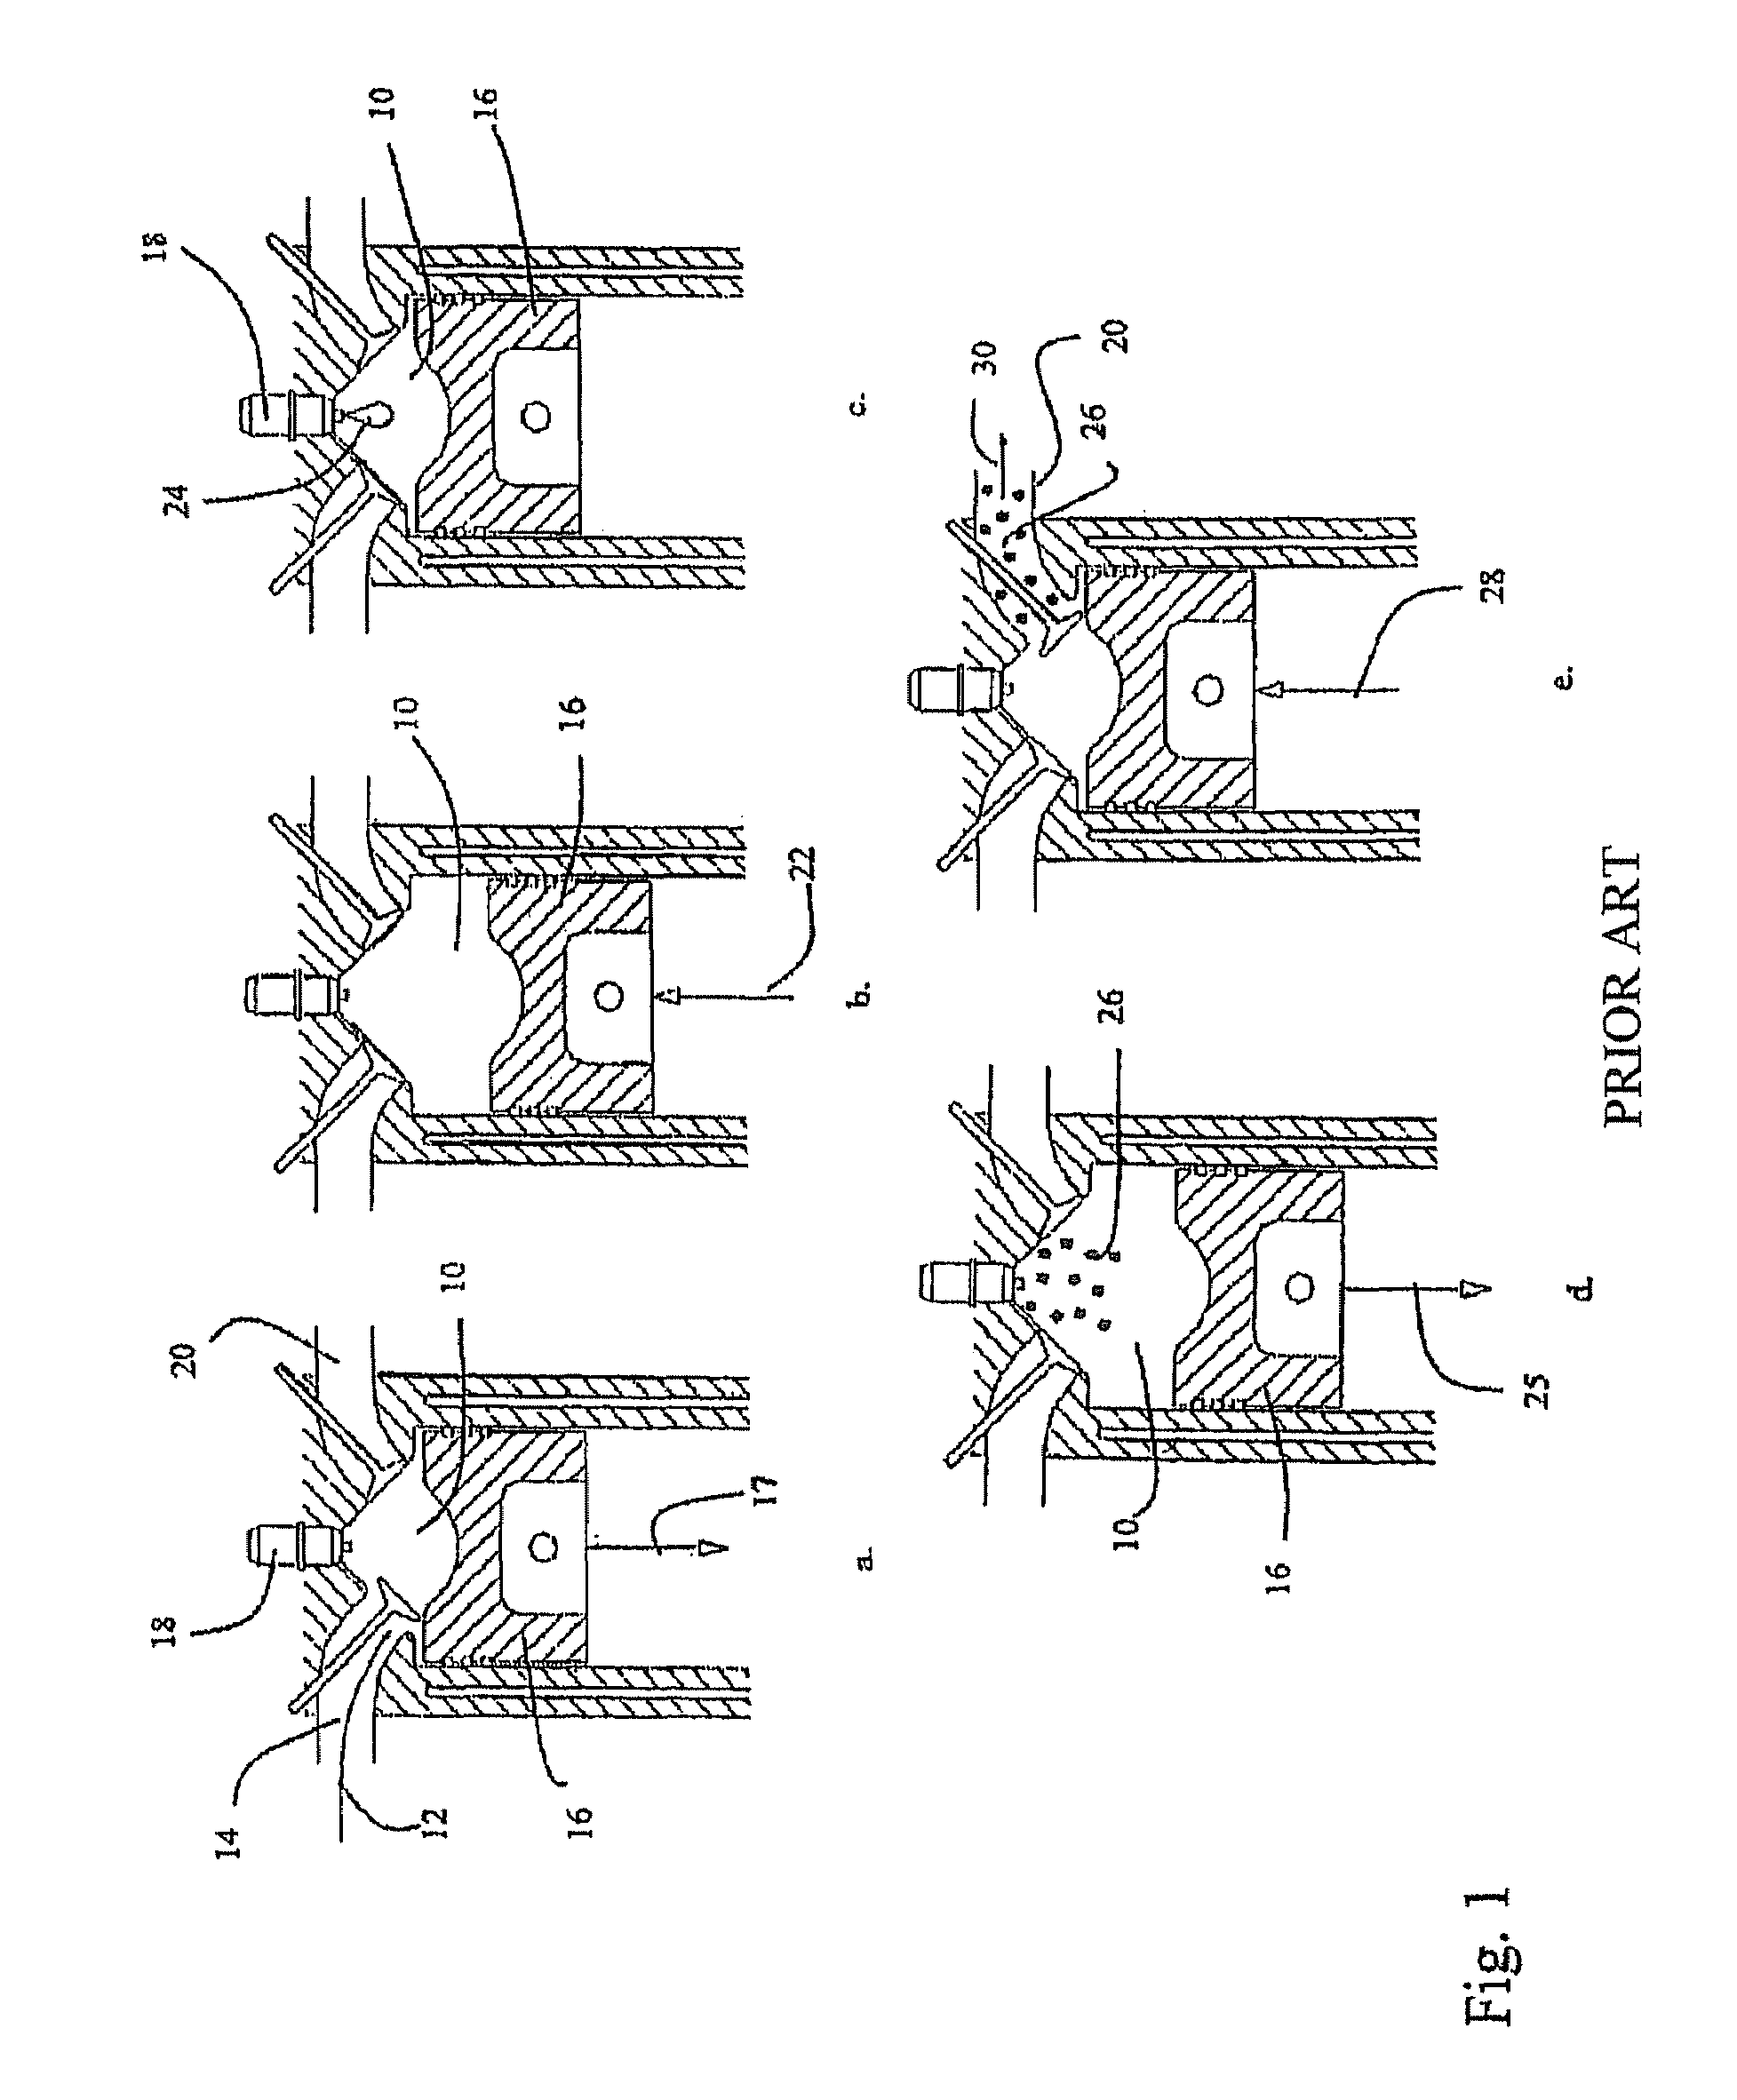 Method for injecting gaseous fuels into an internal combustion engine at high pressures